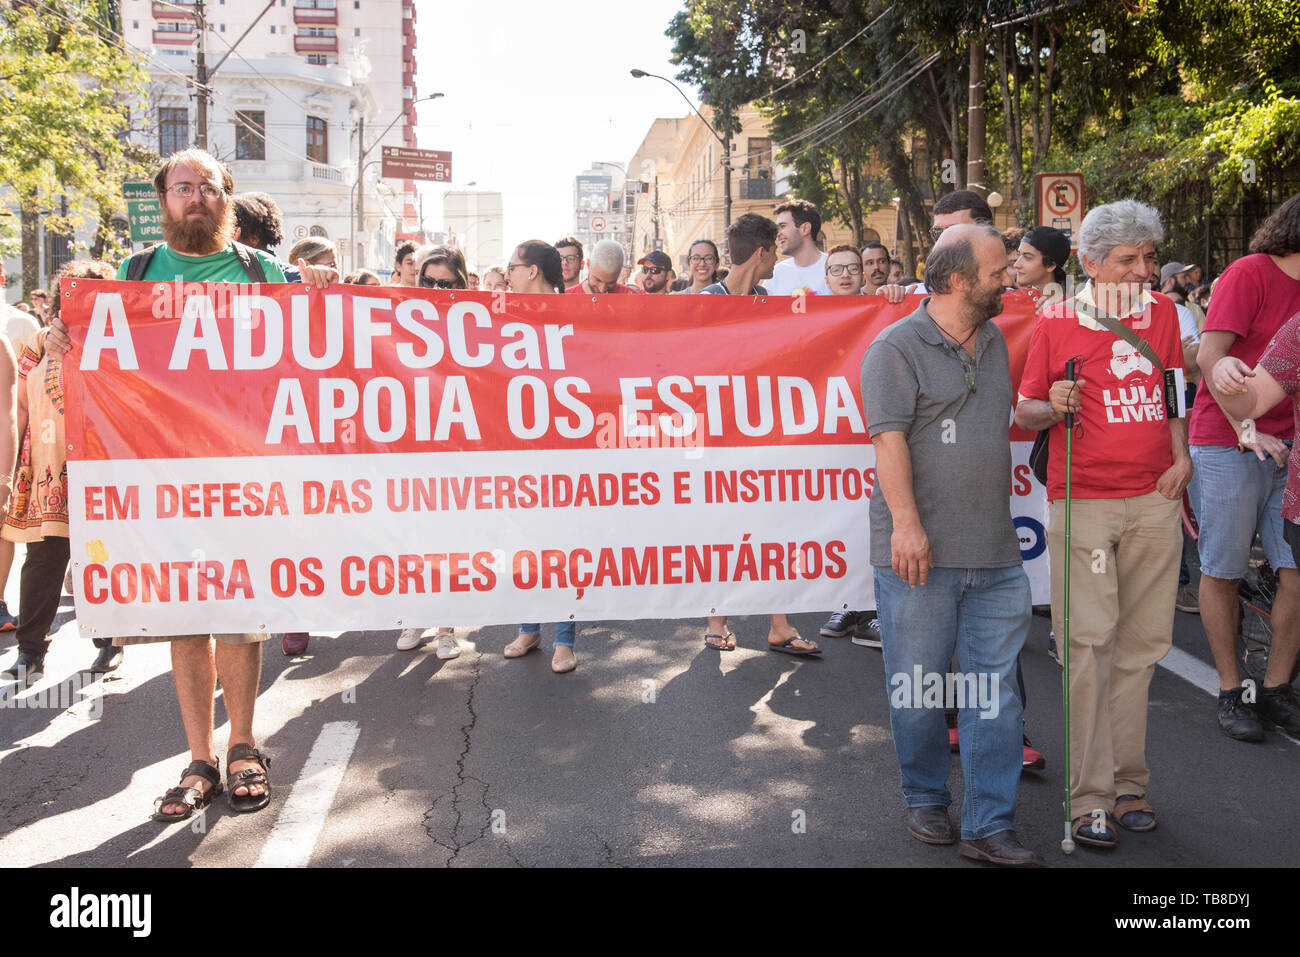 SÃO CARLOS, SP - 30.05.2019: ESTUDANTES VOLTAM AS RUAS EM SÃO CARLOS - Students, teachers and staff again protest against funding cuts in education. UFScar and USP join the movement and cancel classes at all campuses. (Photo: André Luis Ferreira/Fotoarena) Stock Photo